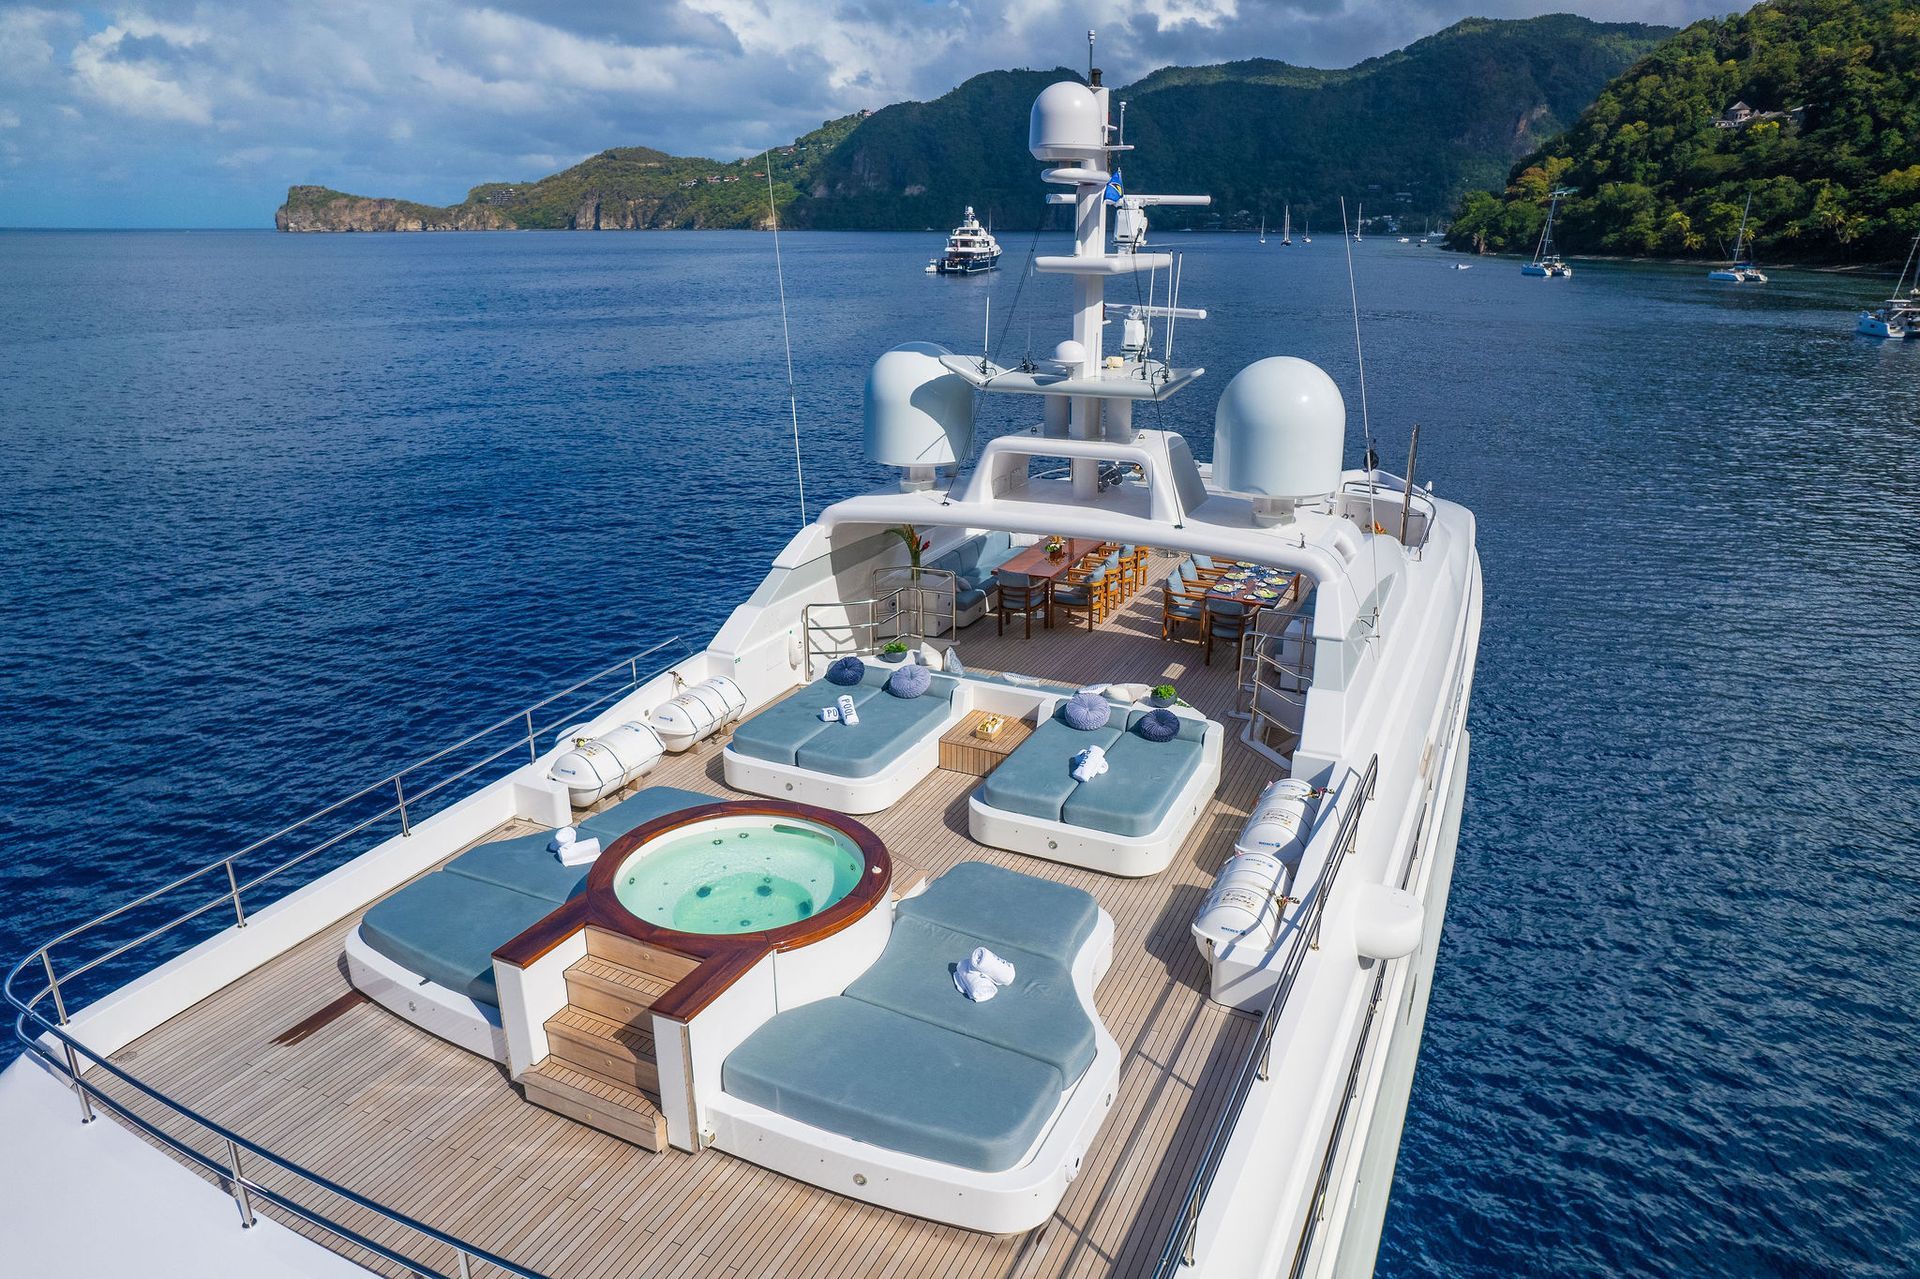 a large yacht is floating on top of a body of water